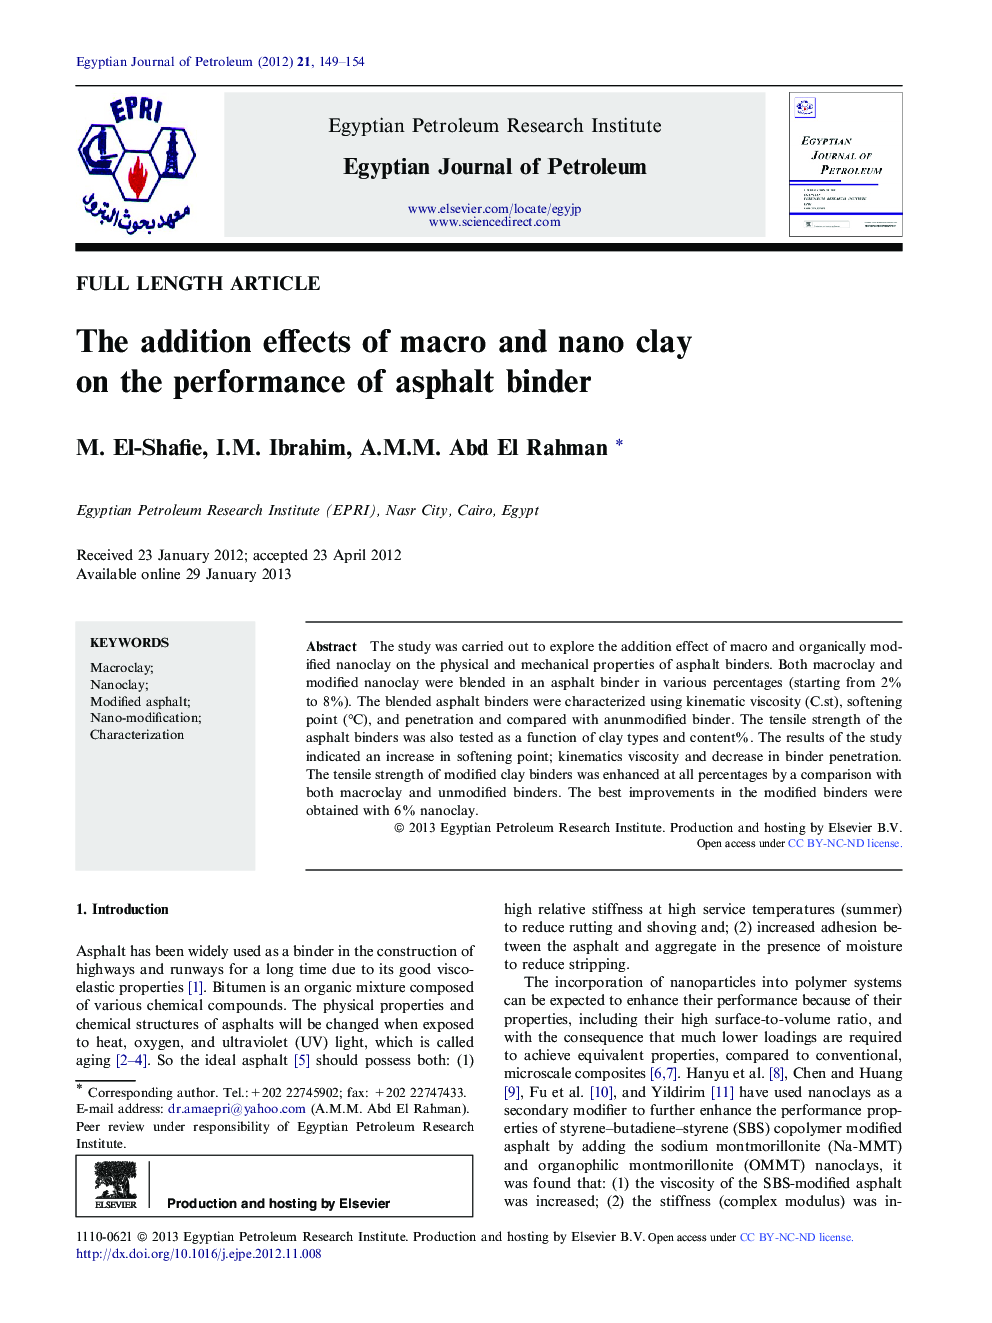 The addition effects of macro and nano clay on the performance of asphalt binder 